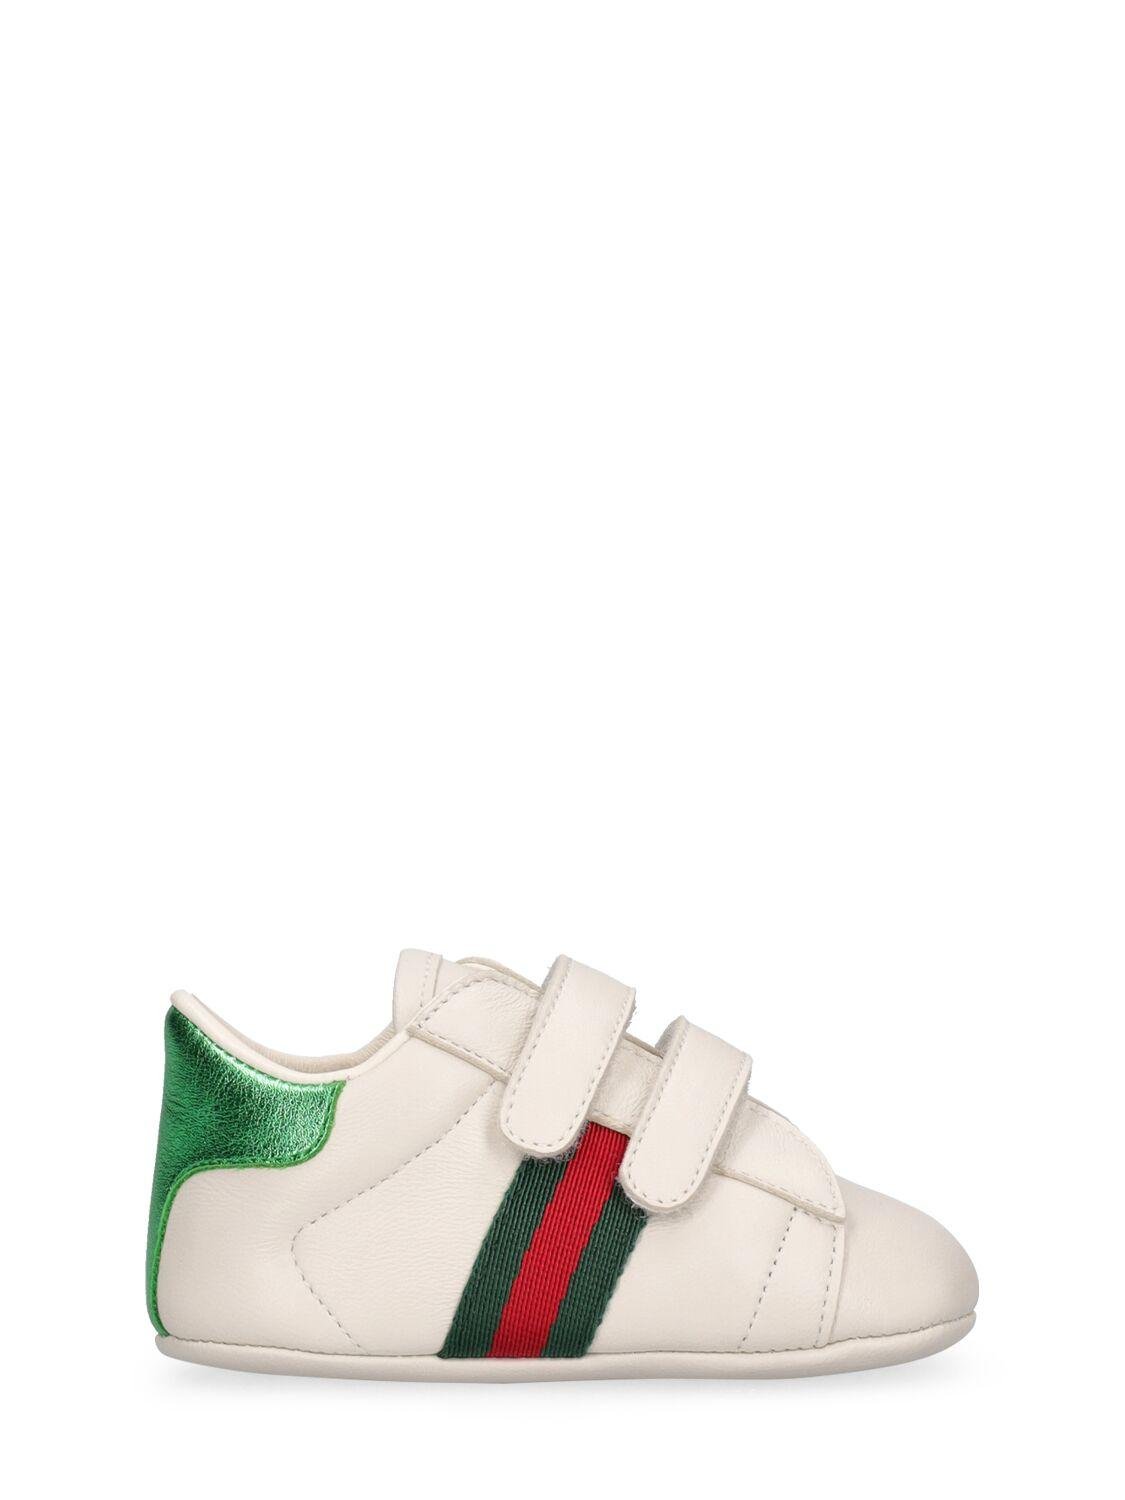 Baby New Ace Pre-walker Shoes by GUCCI